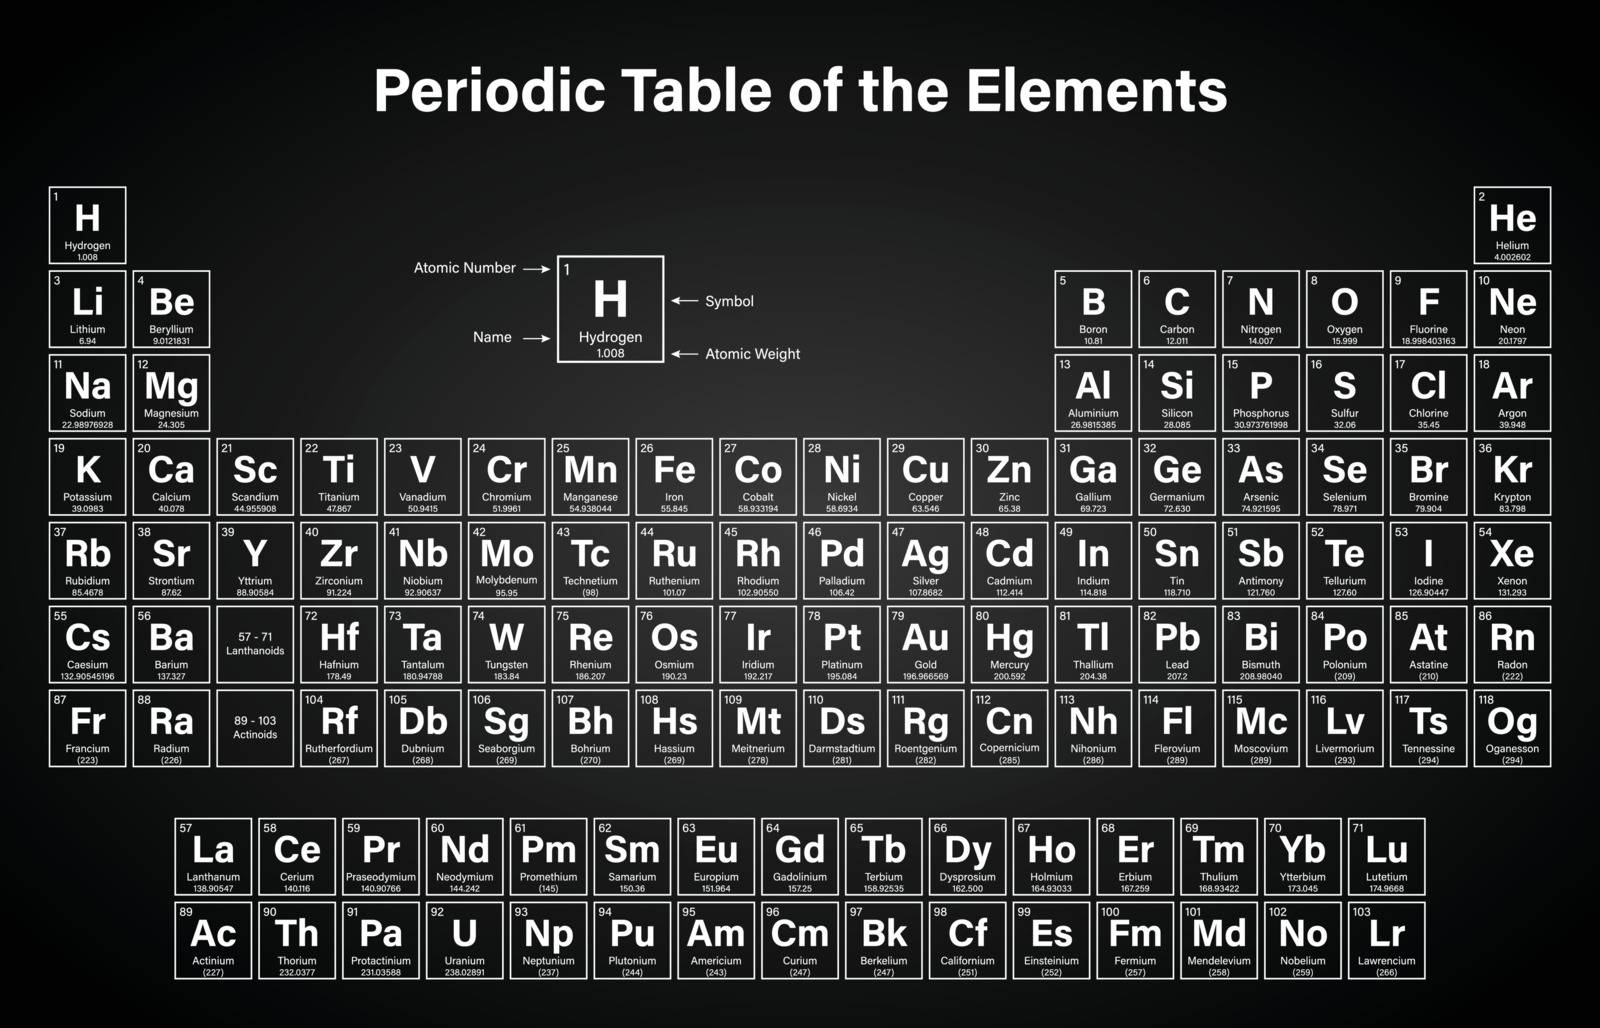 Periodic Table of the Elements by duntaro